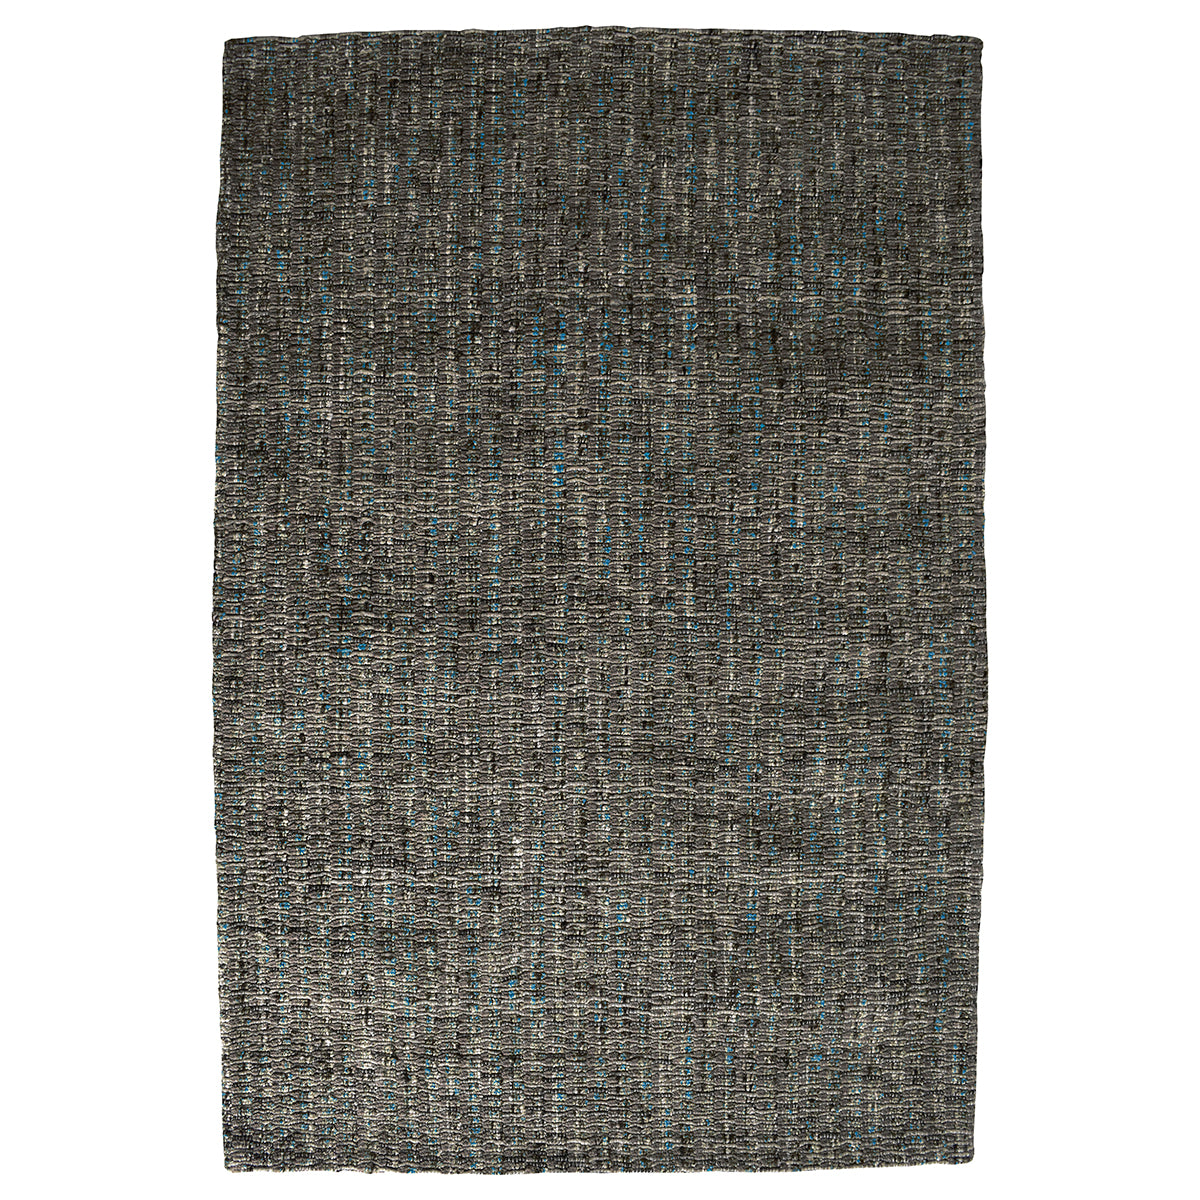 A Brent Rug Stone/Teal 1200x1700mm by Kikiathome.co.uk, a perfect addition to your home interior decor.